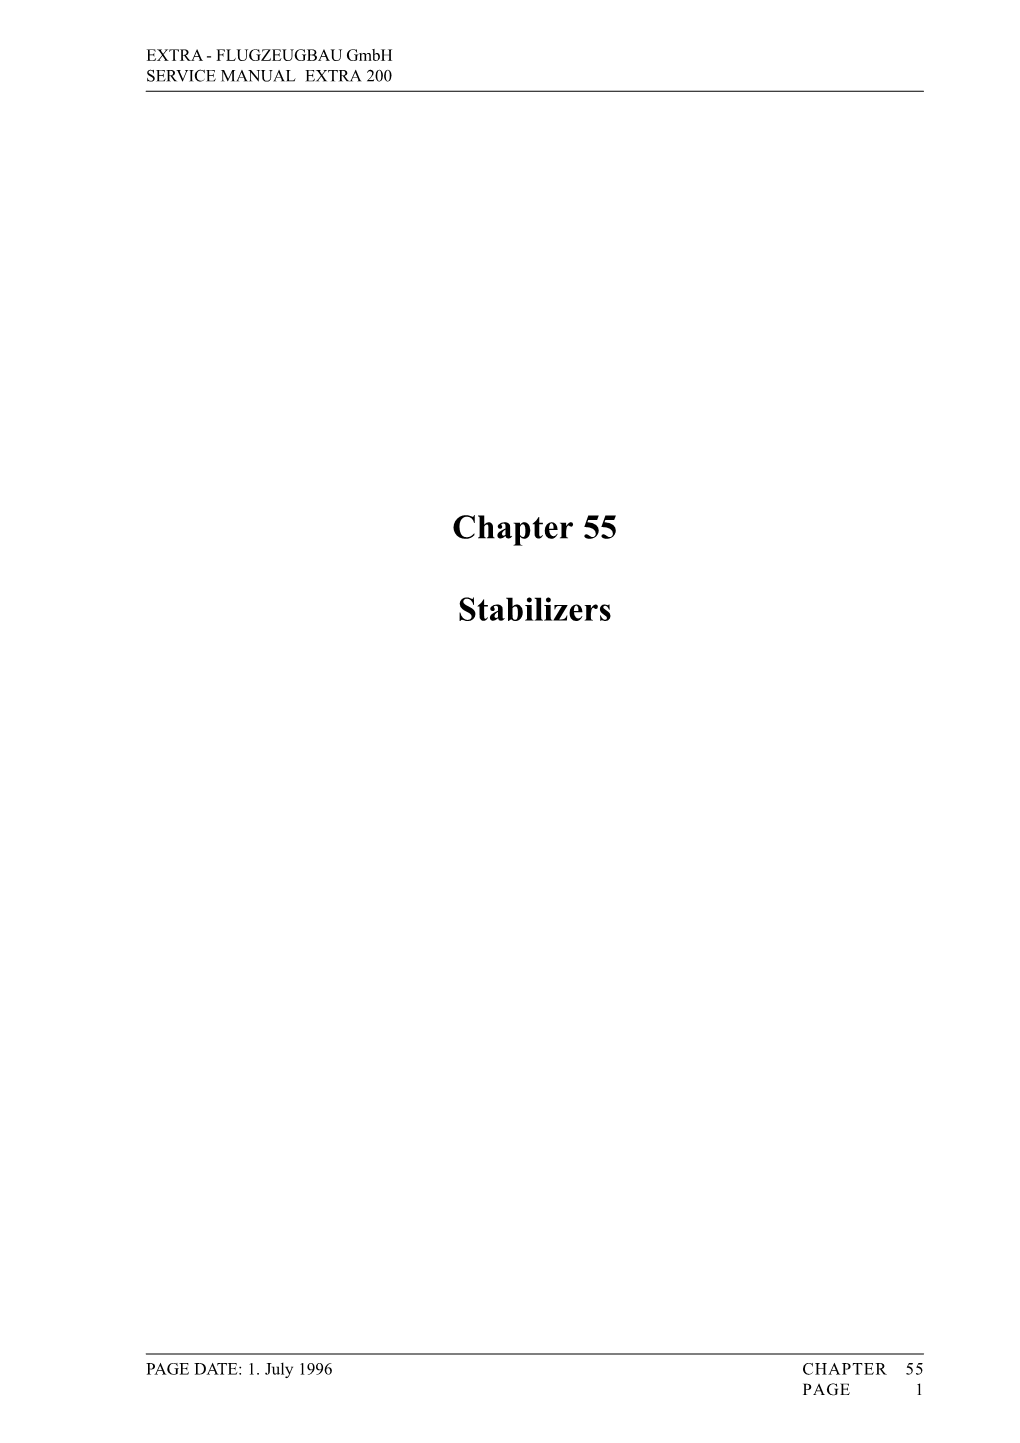 Chapter 55 Stabilizers